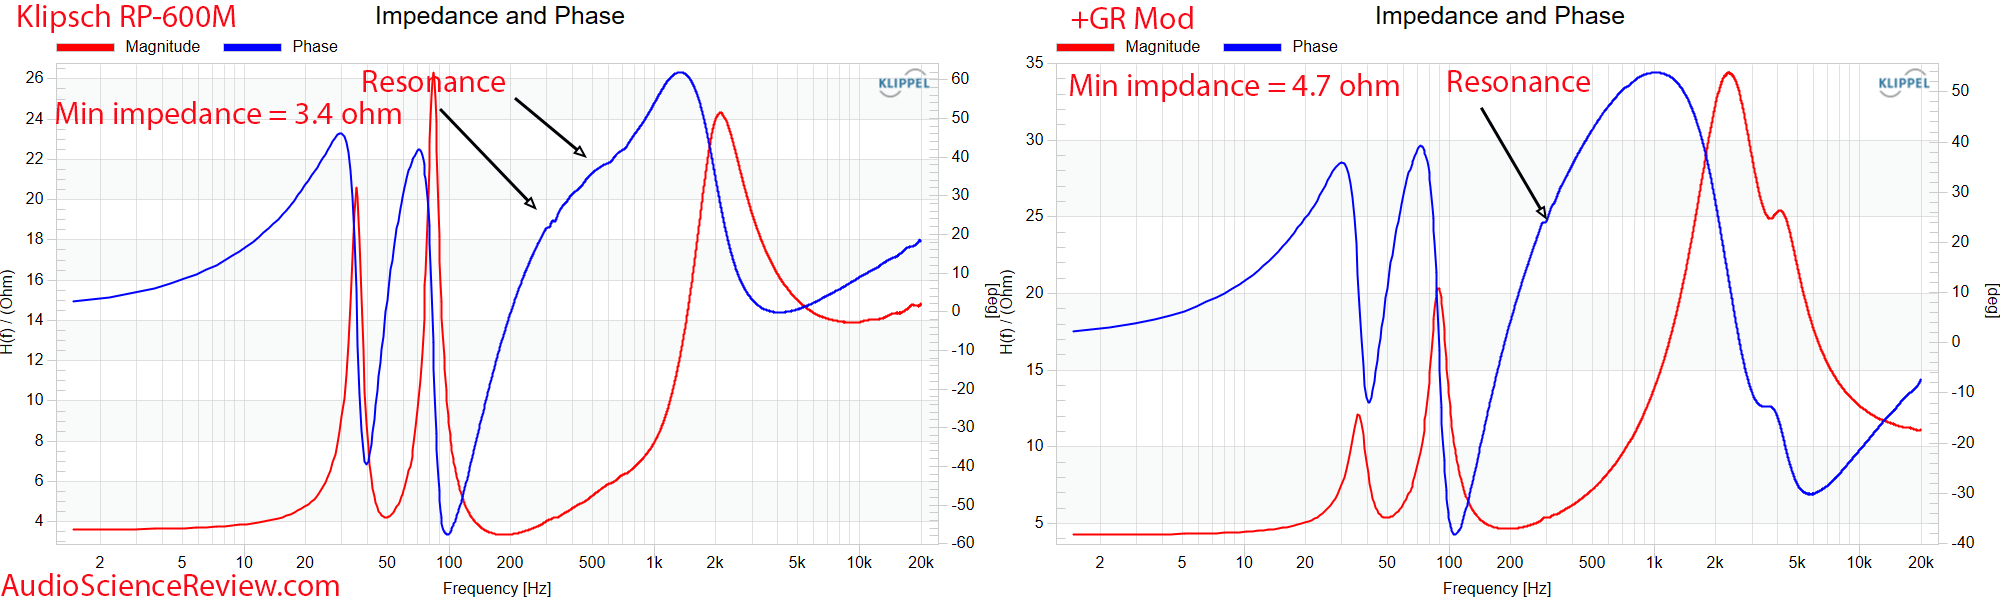 GR Research Klipsch RP-600M Mod New Crossover Impedance and Phase Measurements.png